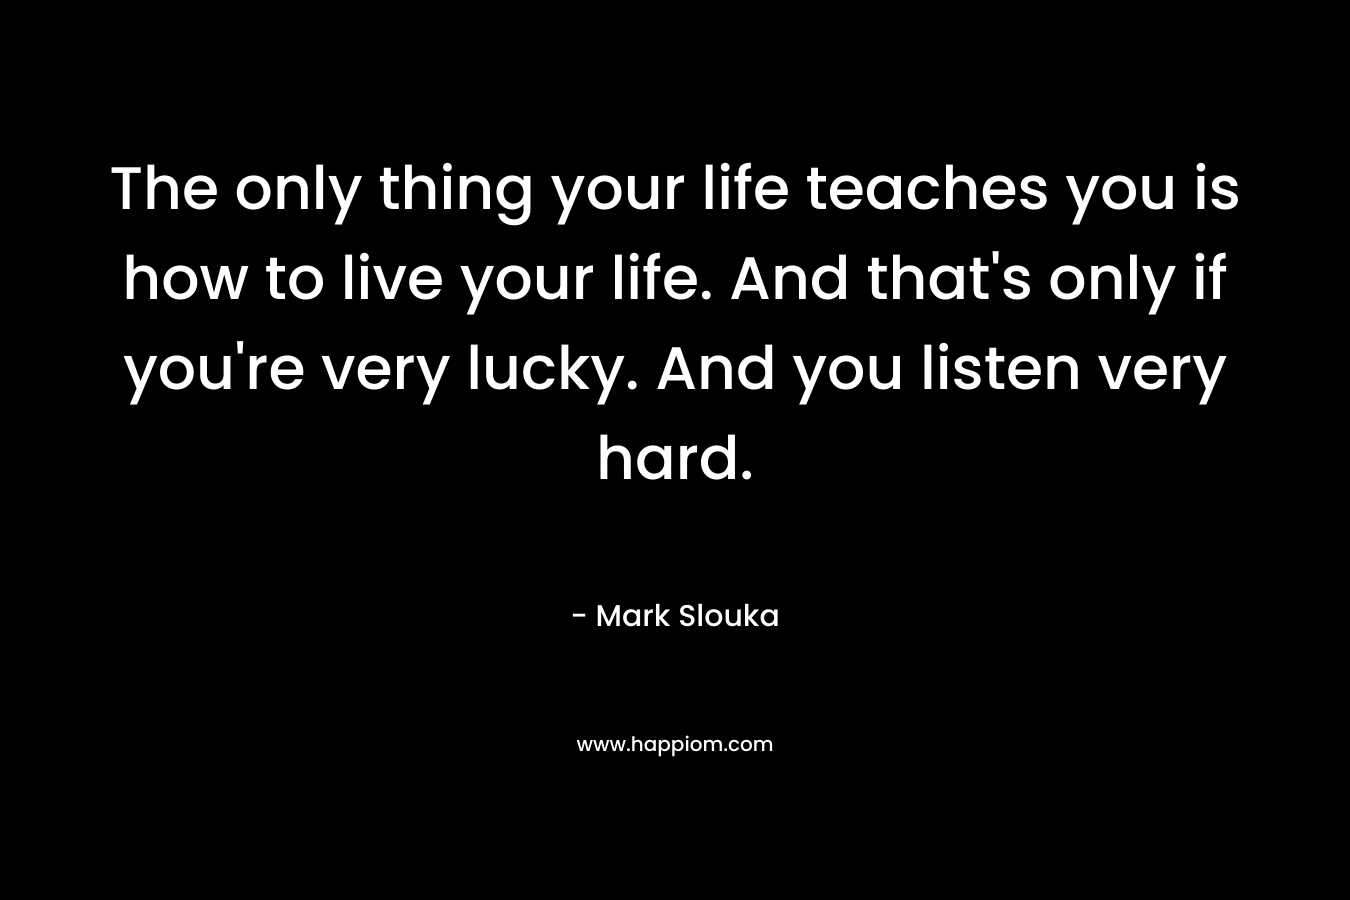 The only thing your life teaches you is how to live your life. And that’s only if you’re very lucky. And you listen very hard. – Mark Slouka